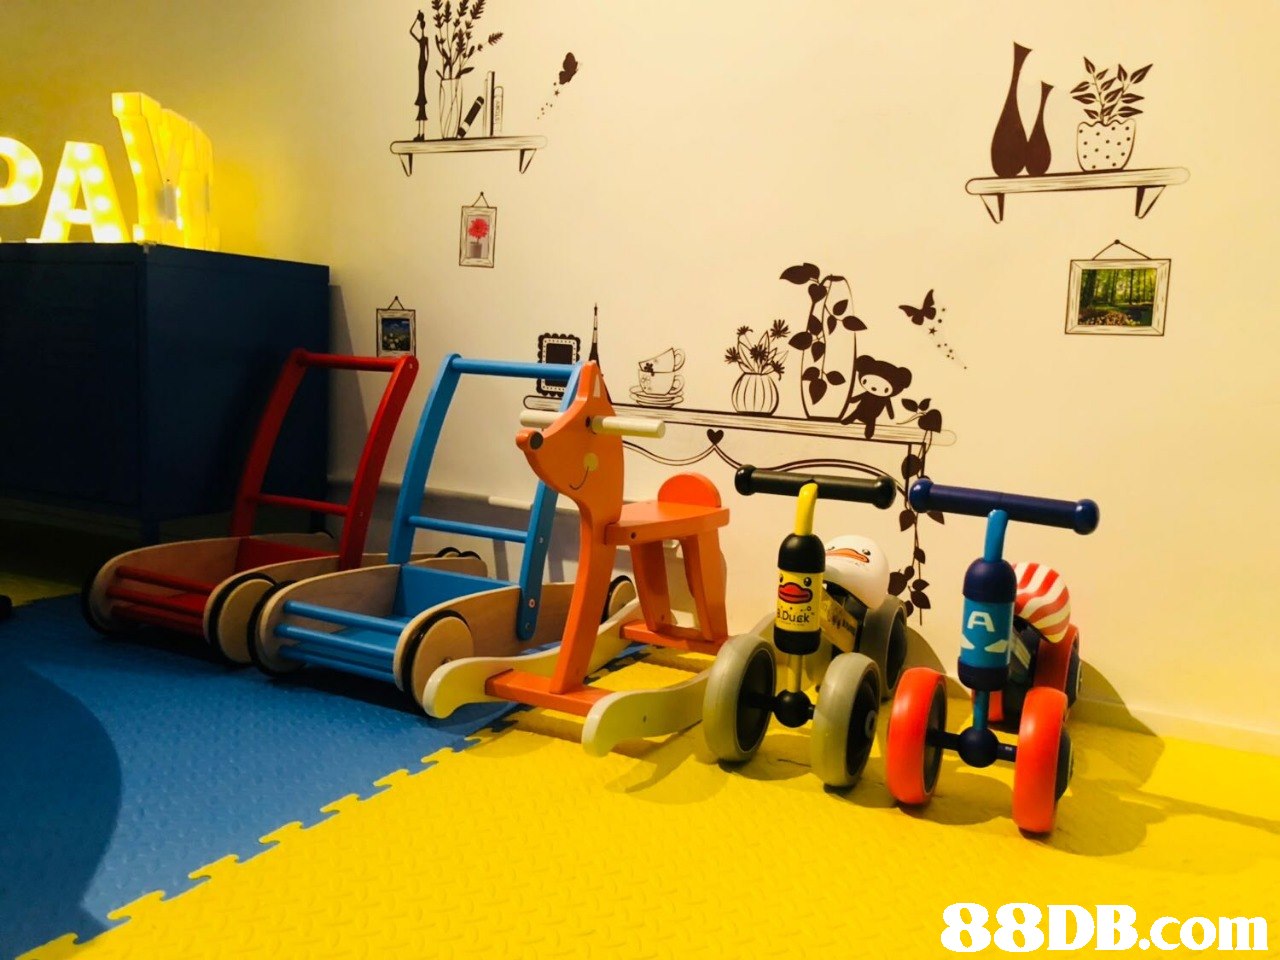   toy,room,product,play,